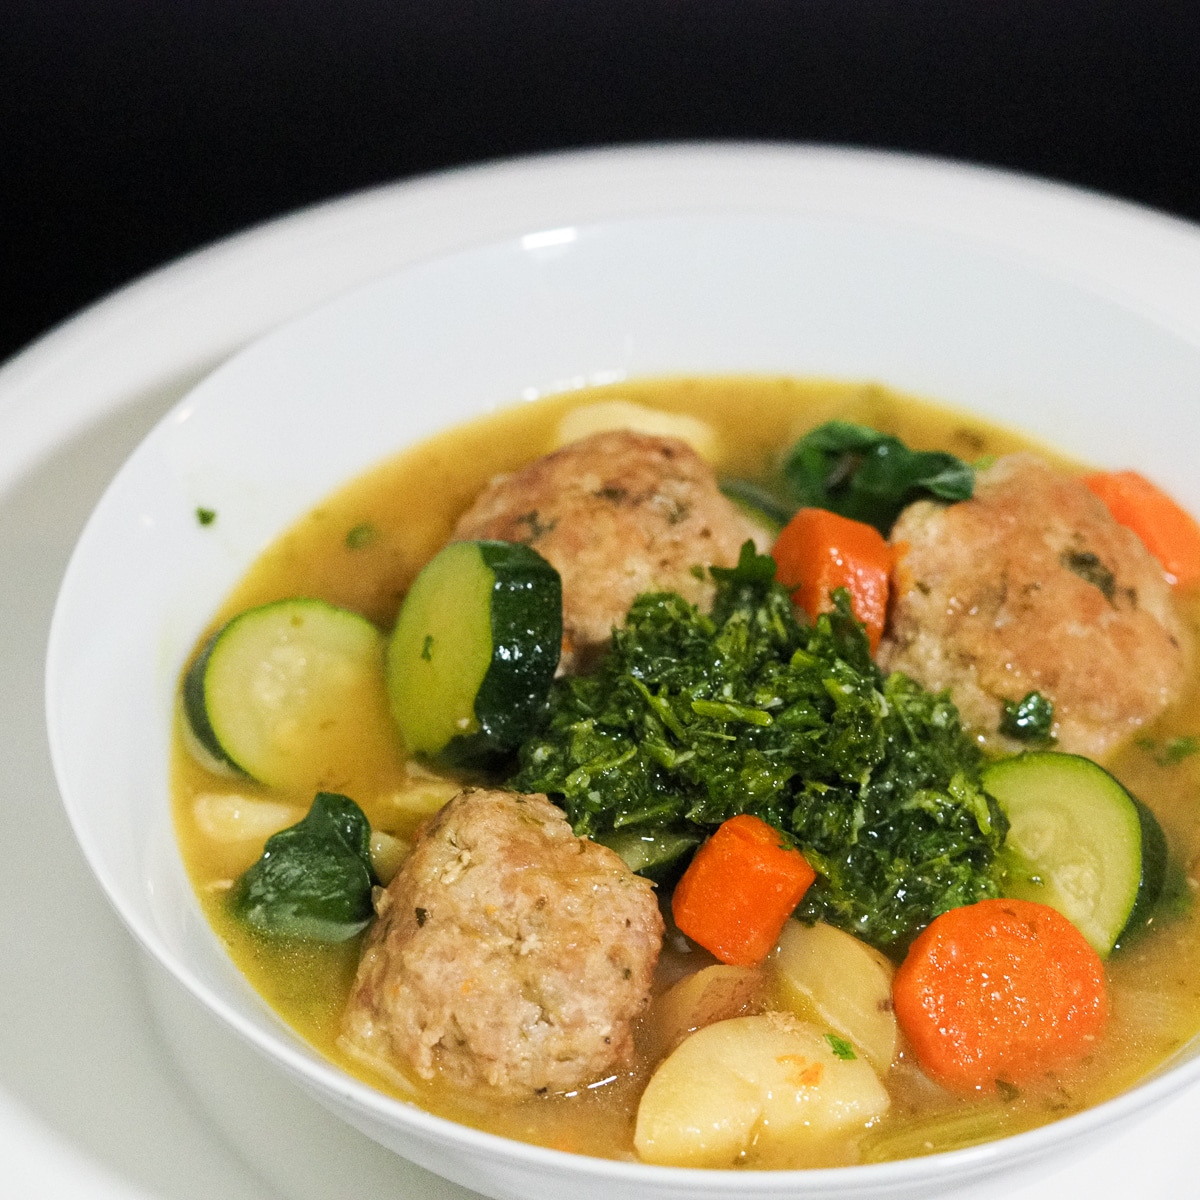 Chicken Meatball Soup with Herb Pesto